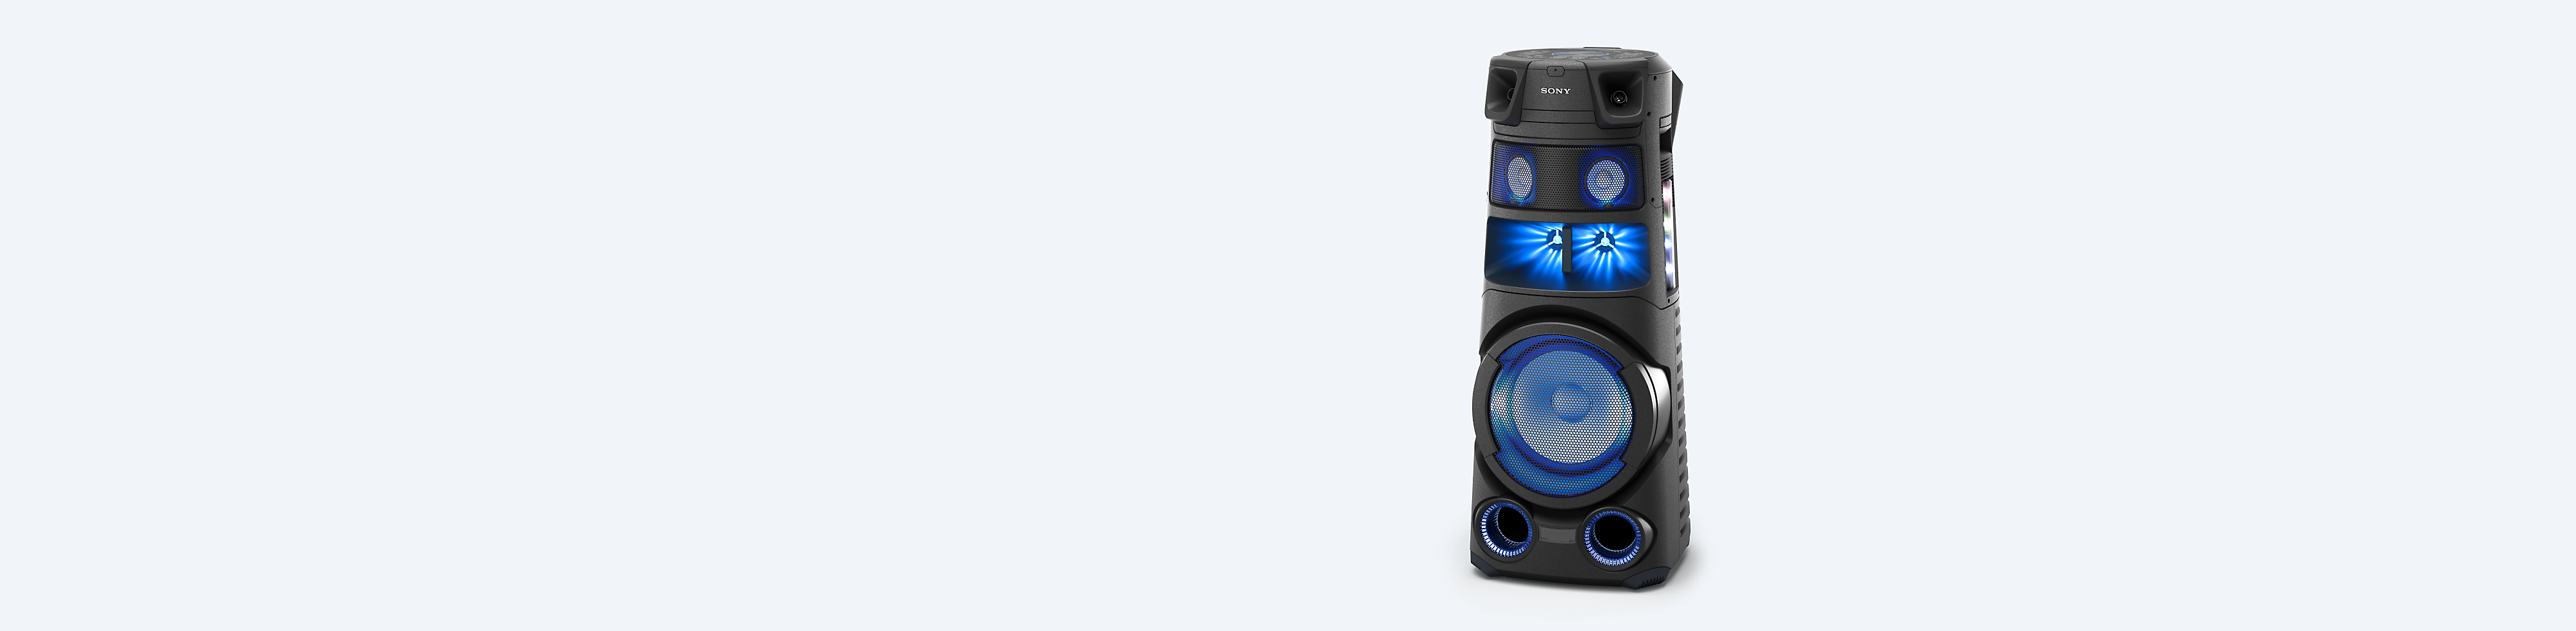 Sony high power audio system on blue background